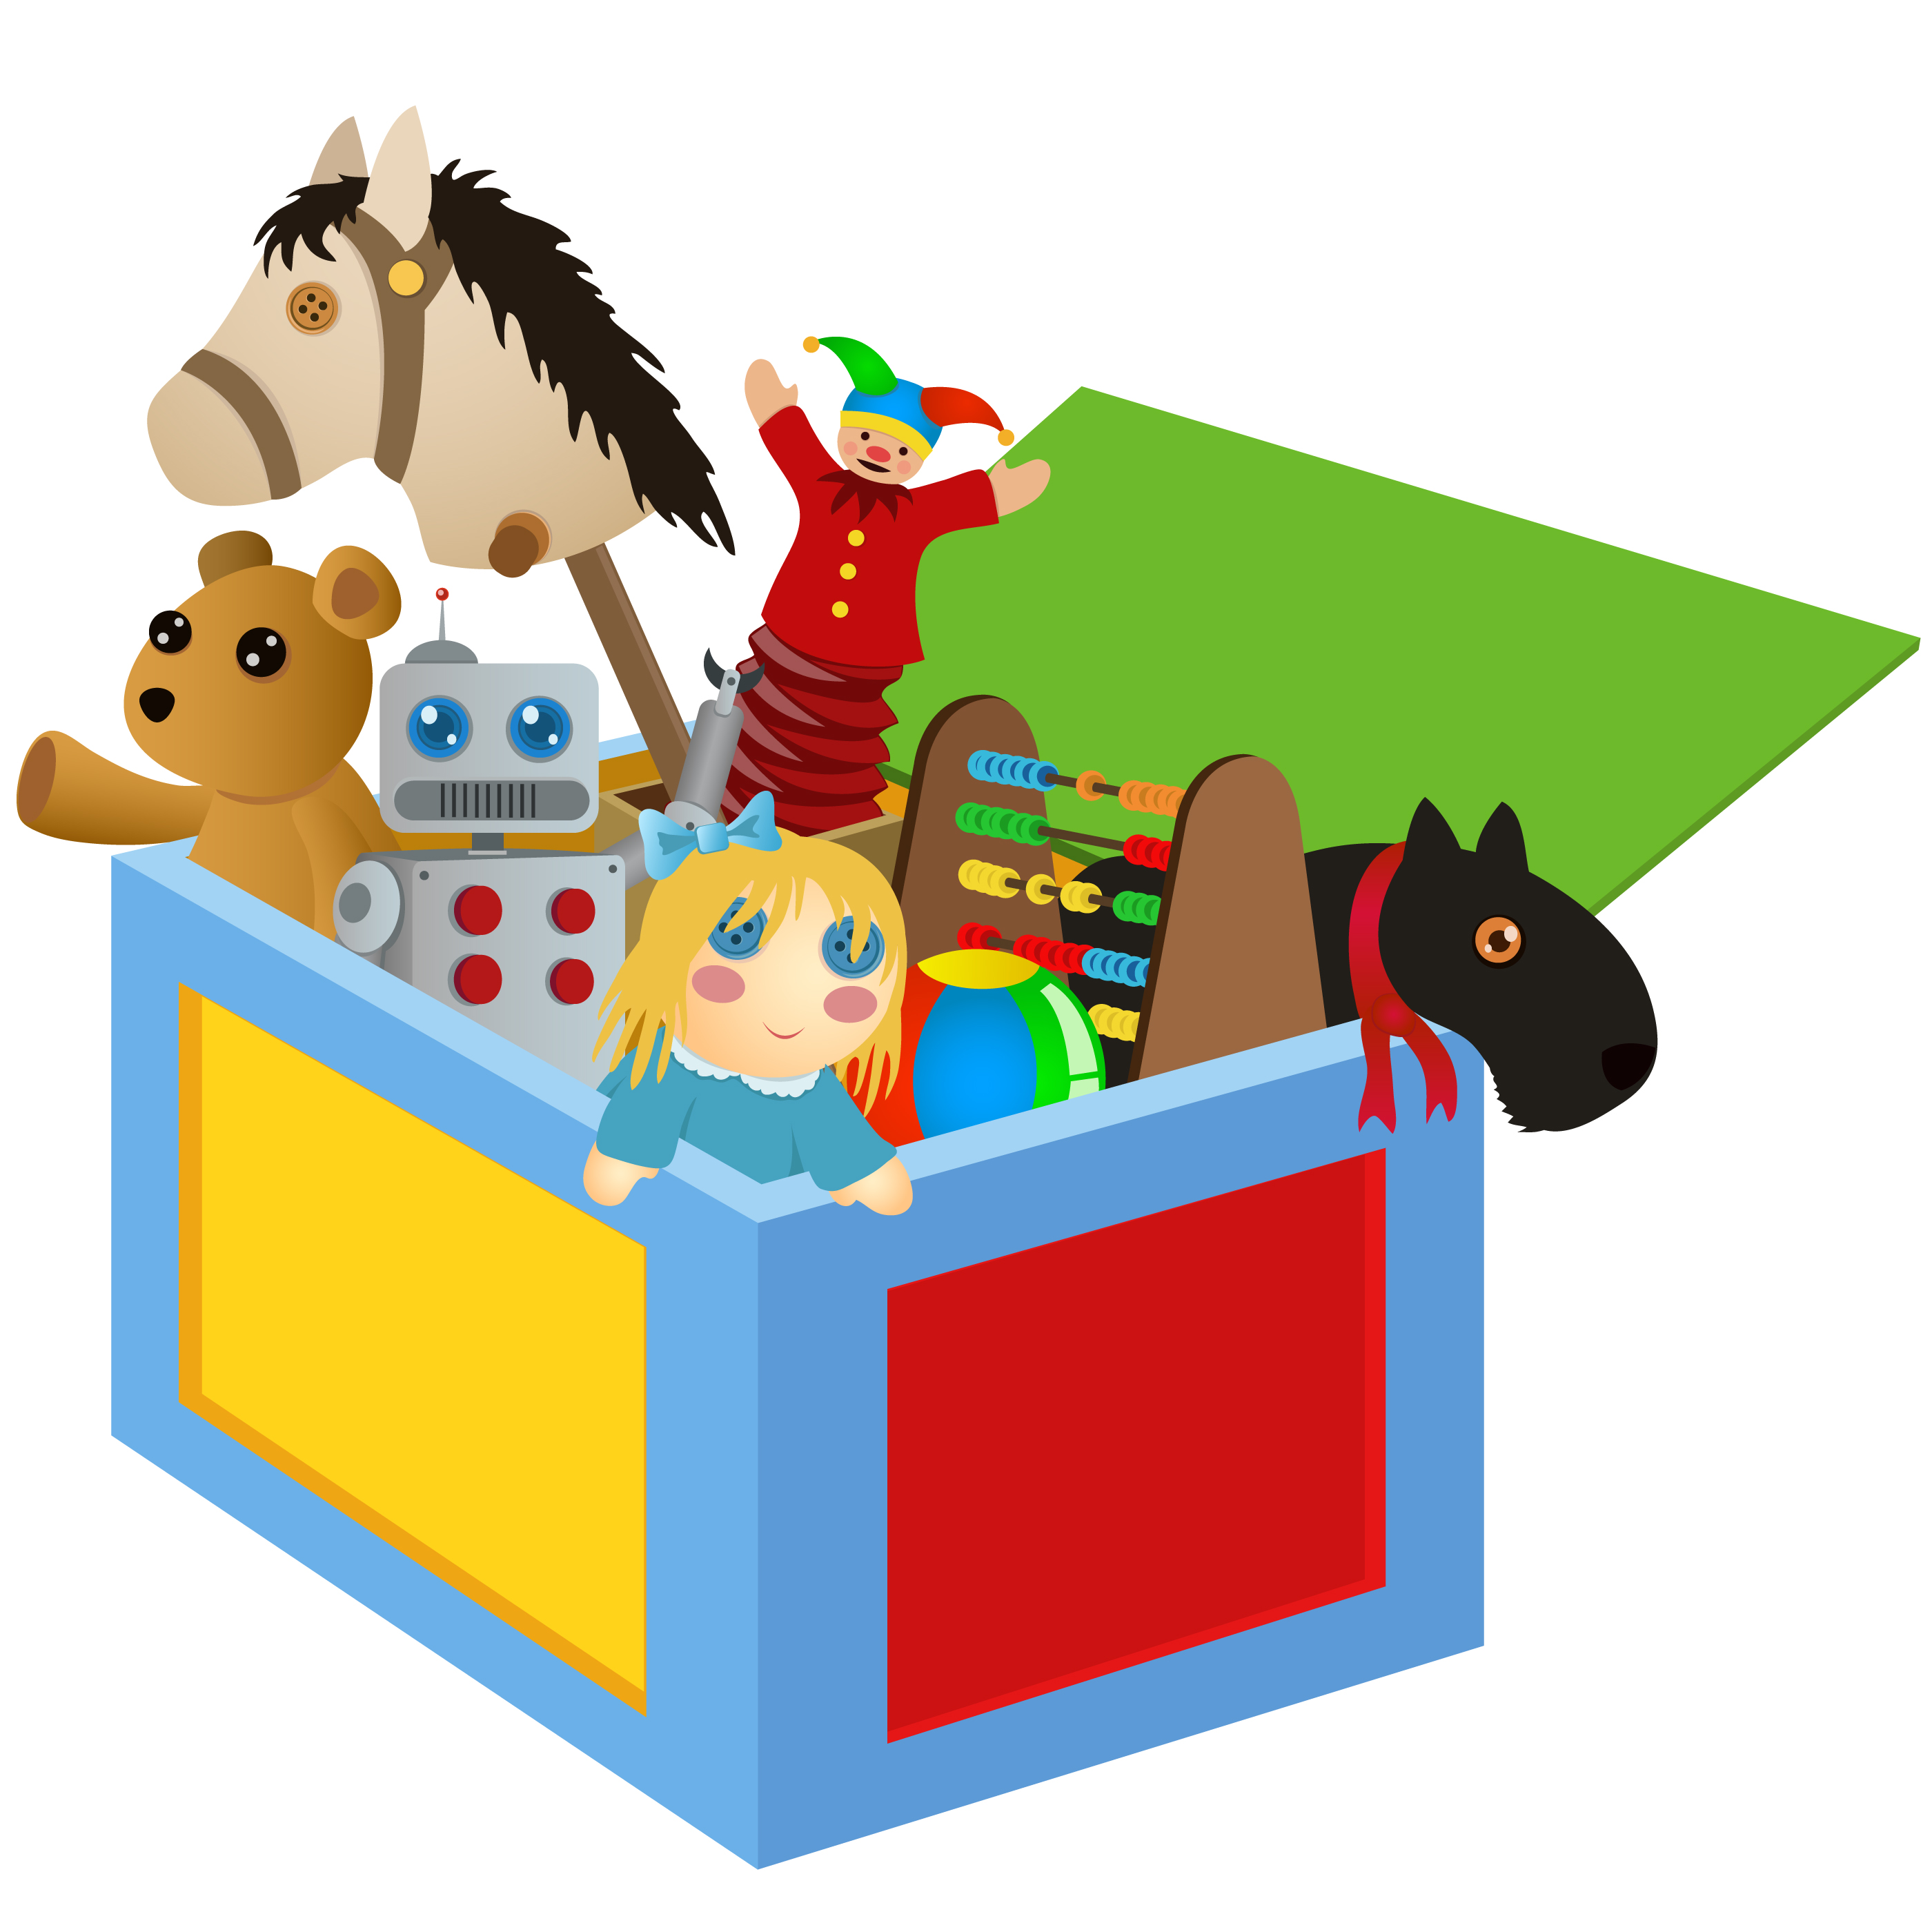 clean up toys clipart free - photo #21